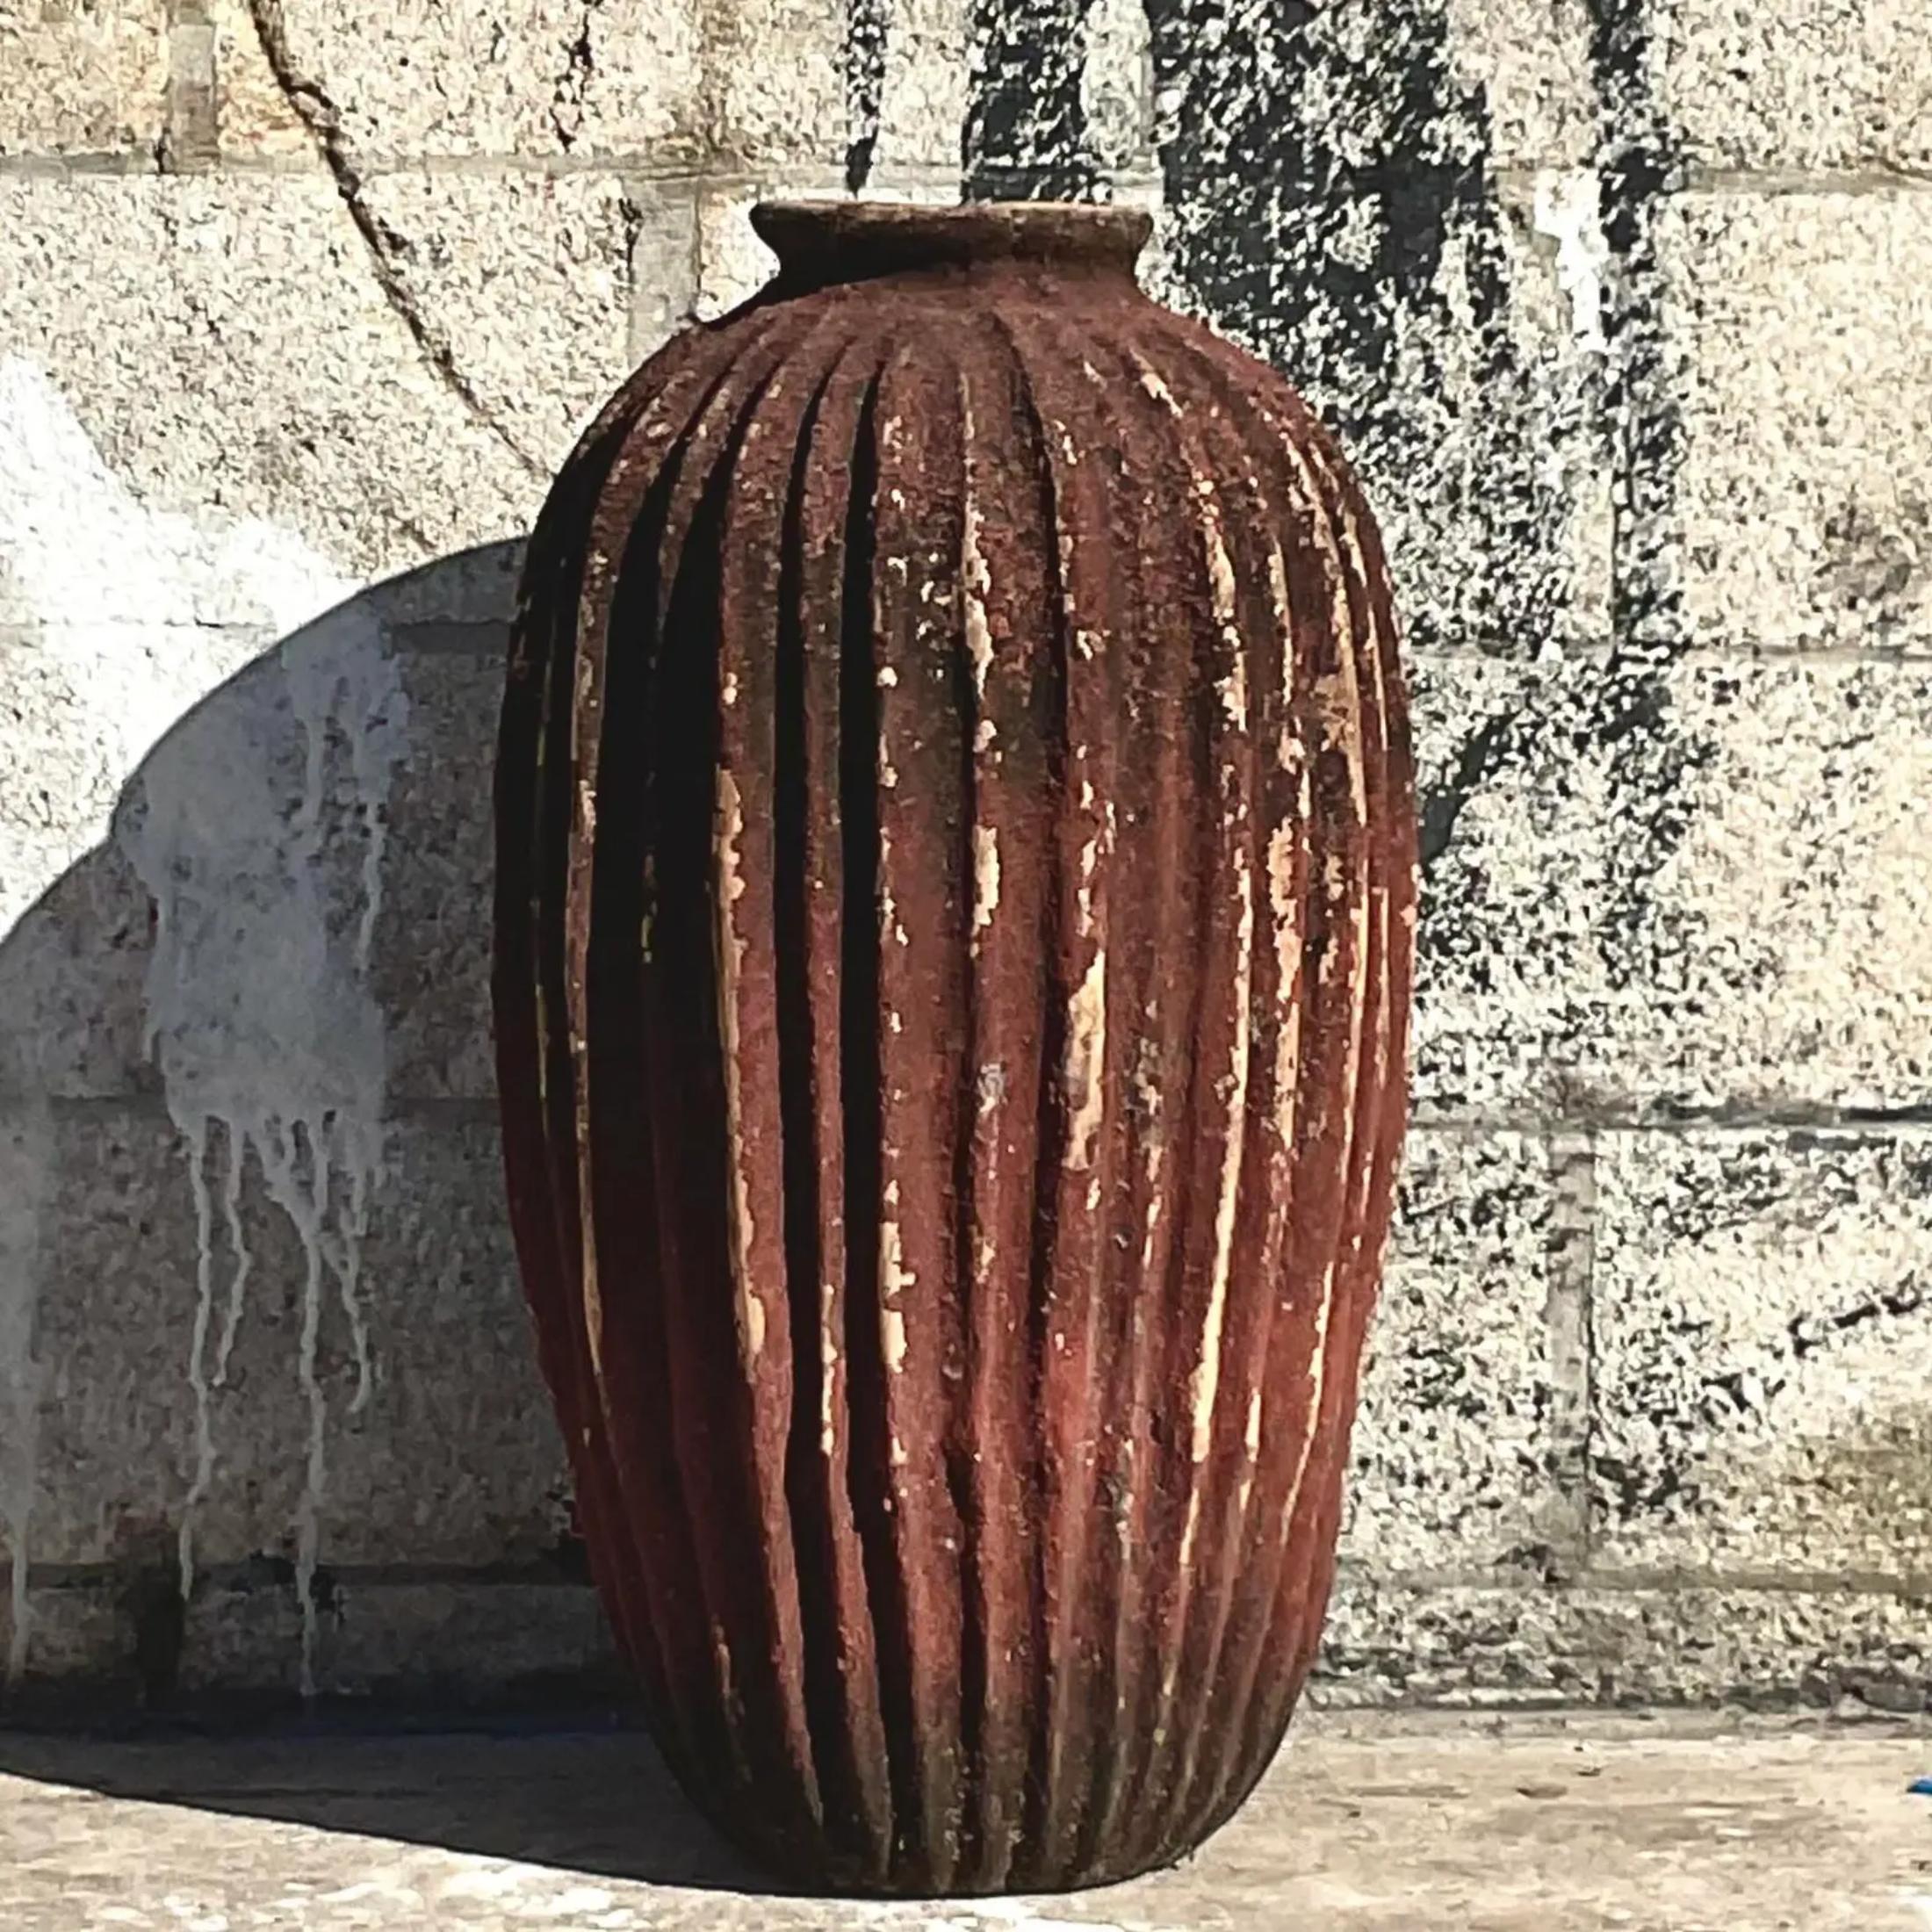 A fabulous vintage terracotta planter with ridges all over its surface. It’s unique in size and a great addition to your garden alone or in a set. Acquired at a Palm Beach estate